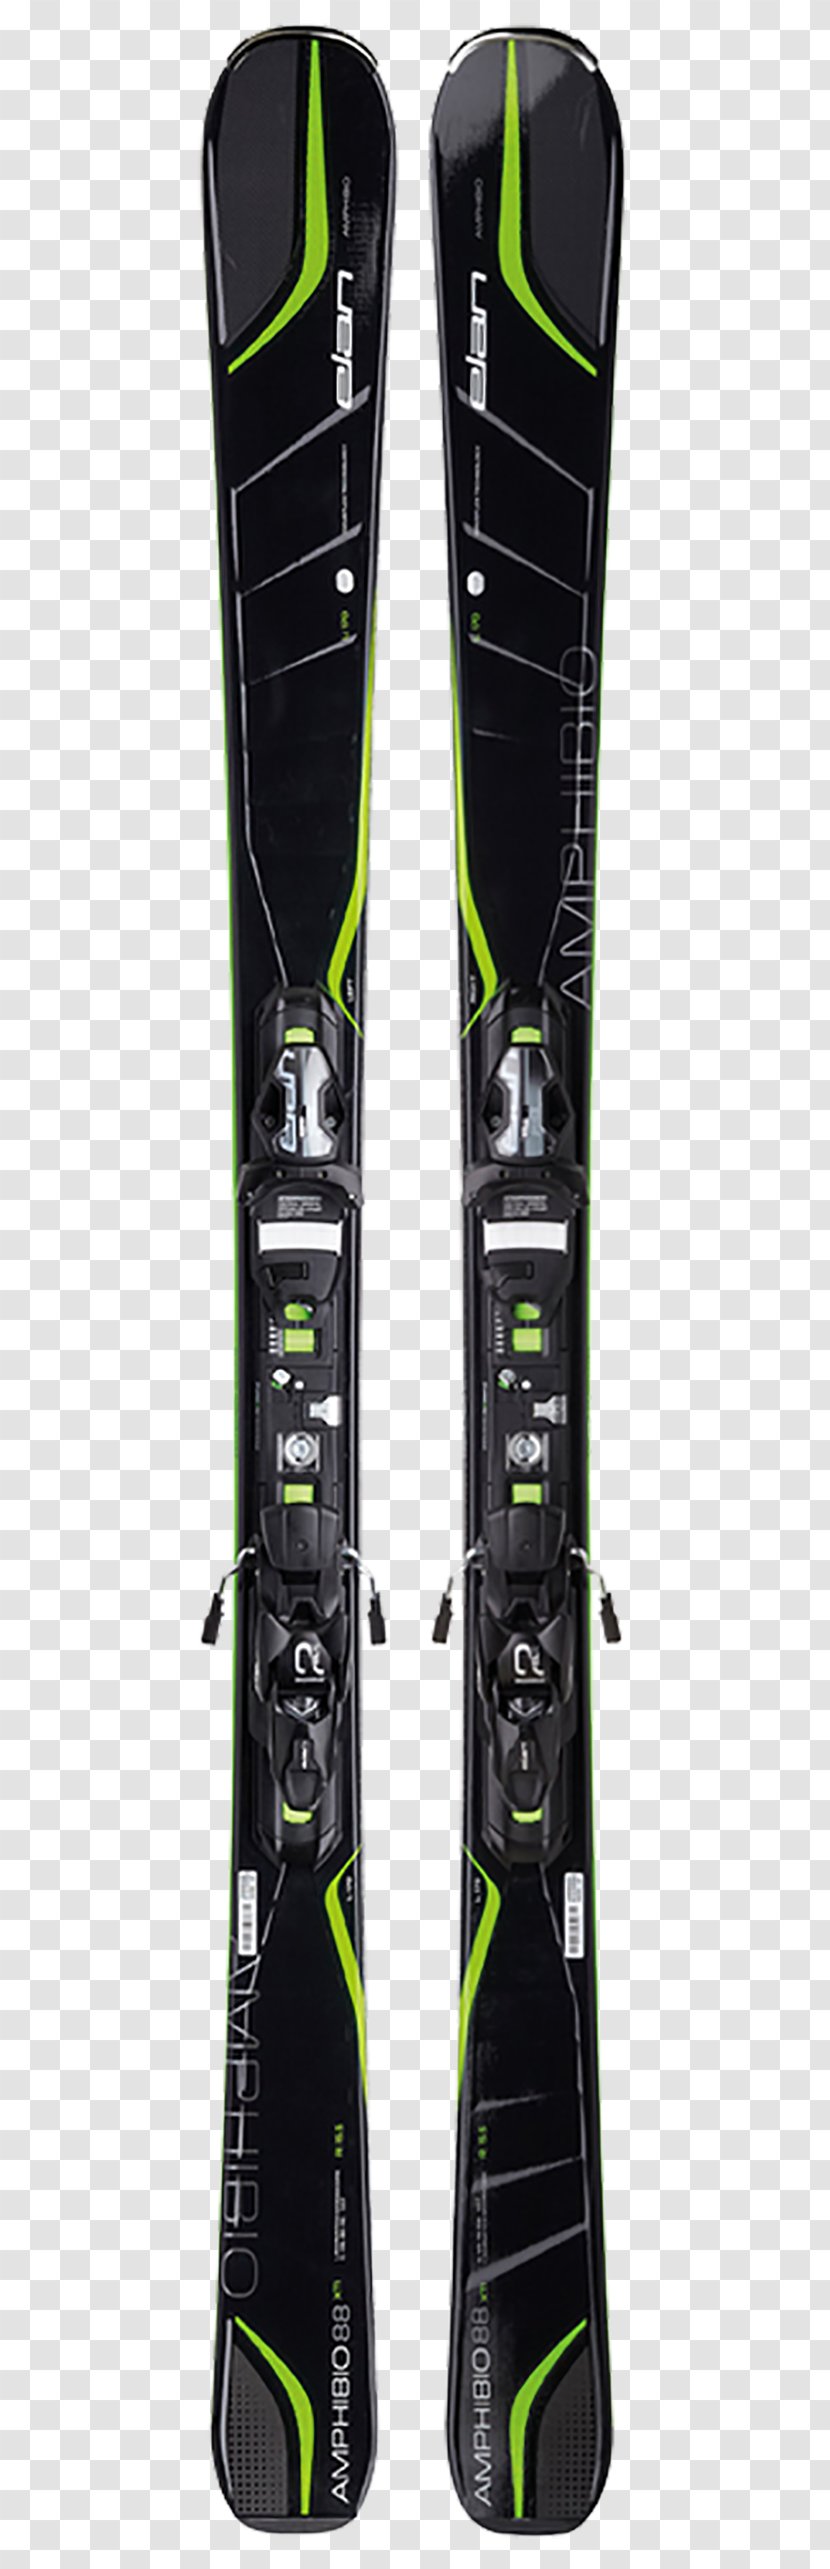 Skiing Nordica Skis Rossignol Carved Turn Transparent PNG